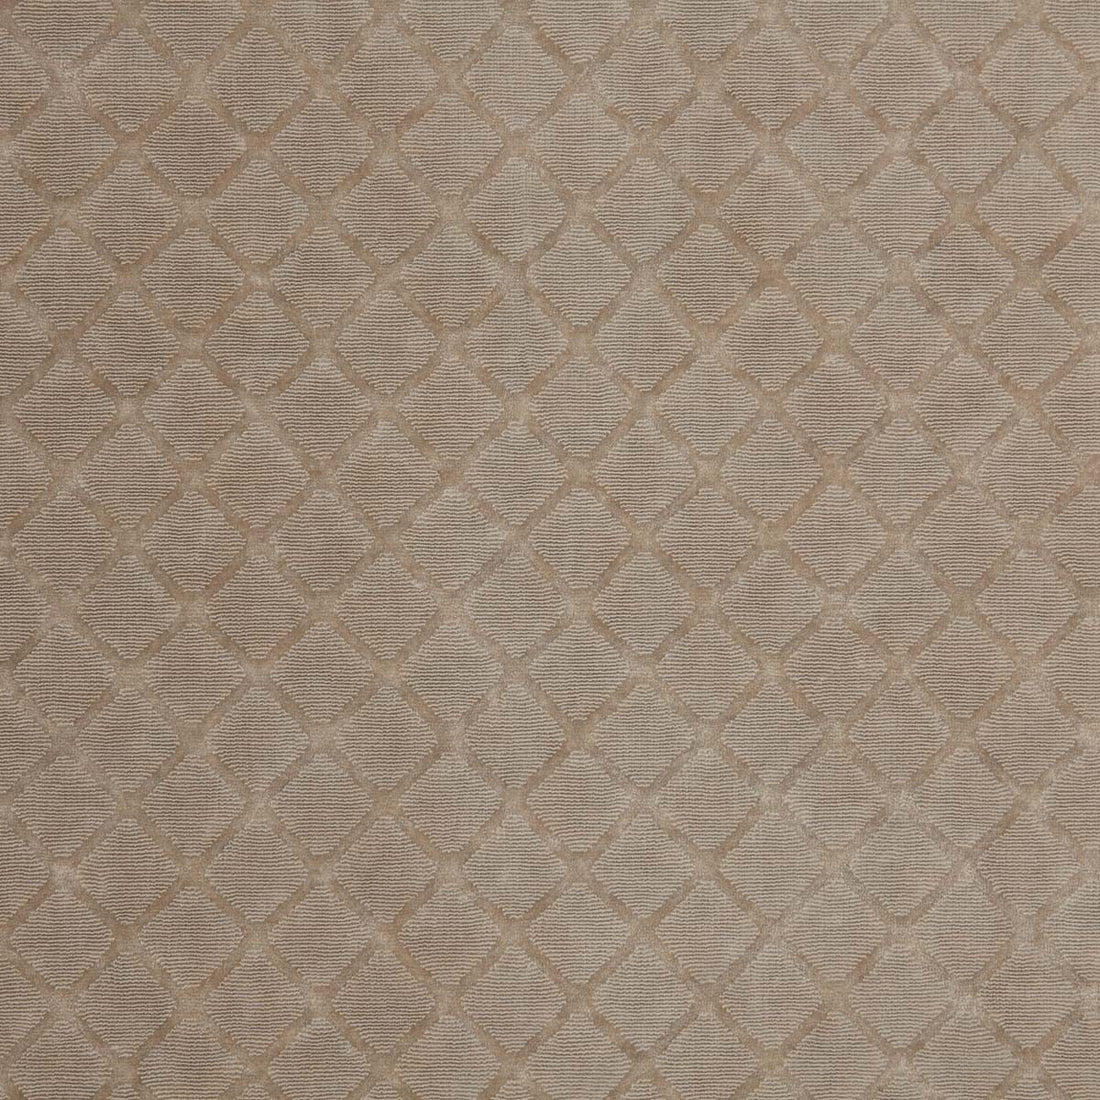 Sika fabric in 2 color - pattern LZ-30361.02.0 - by Kravet Design in the Lizzo collection